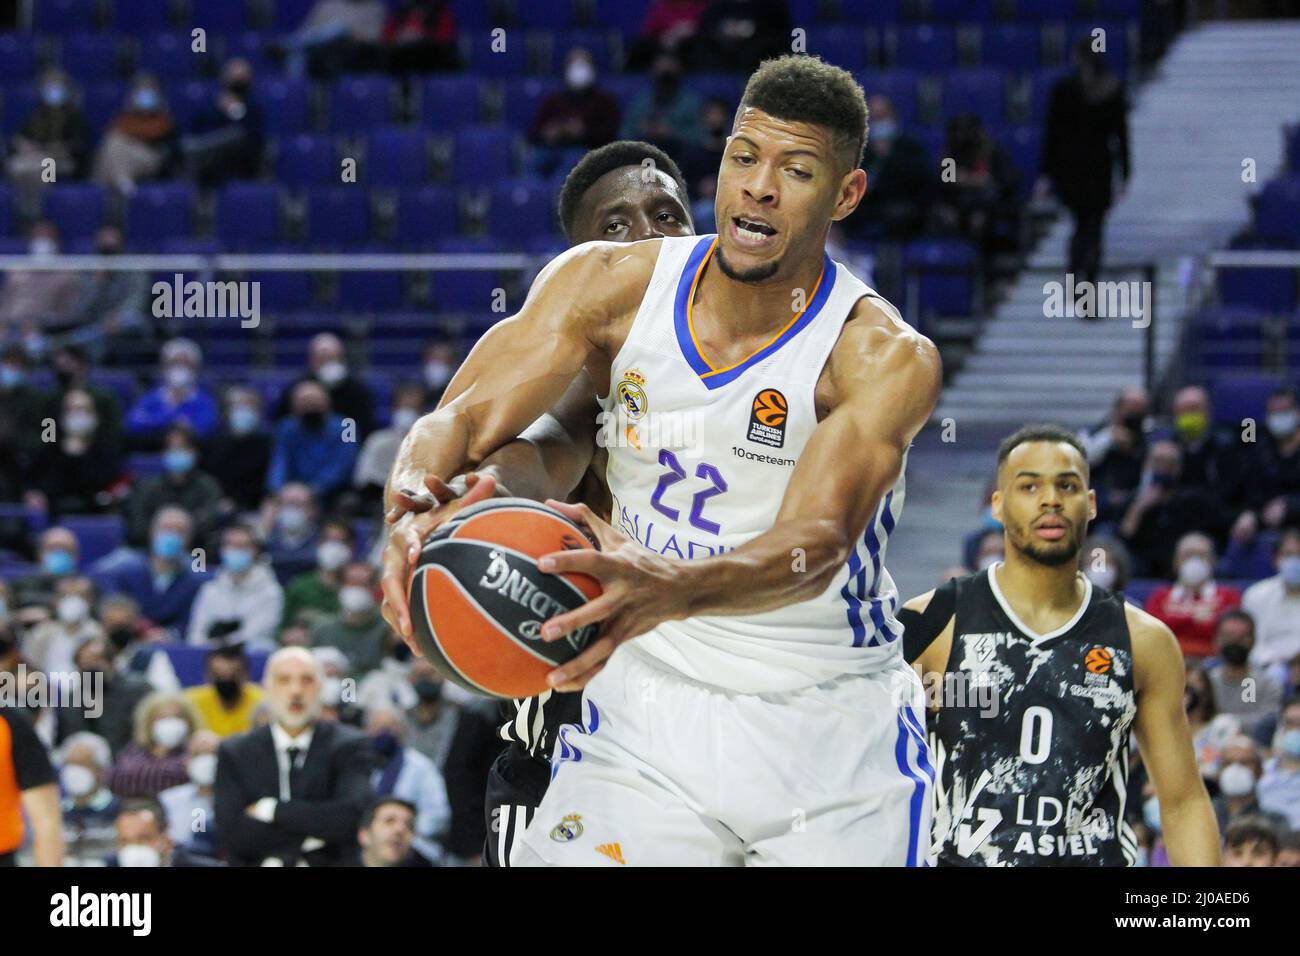 Madrid, Spain. 17th Mar, 2022. Youssoupha Birima Fall of Asvel Lyon-Villeurbanne and Walter Samuel Tavares da Veiga of Real Madrid during the Turkish Airlines Euroleague basketball match between Real Madrid and Asvel Lyon-Villeurbanne on march 17, 2022 at Wizink Center in Madrid, Spain Credit: Independent Photo Agency/Alamy Live Newss Stock Photo